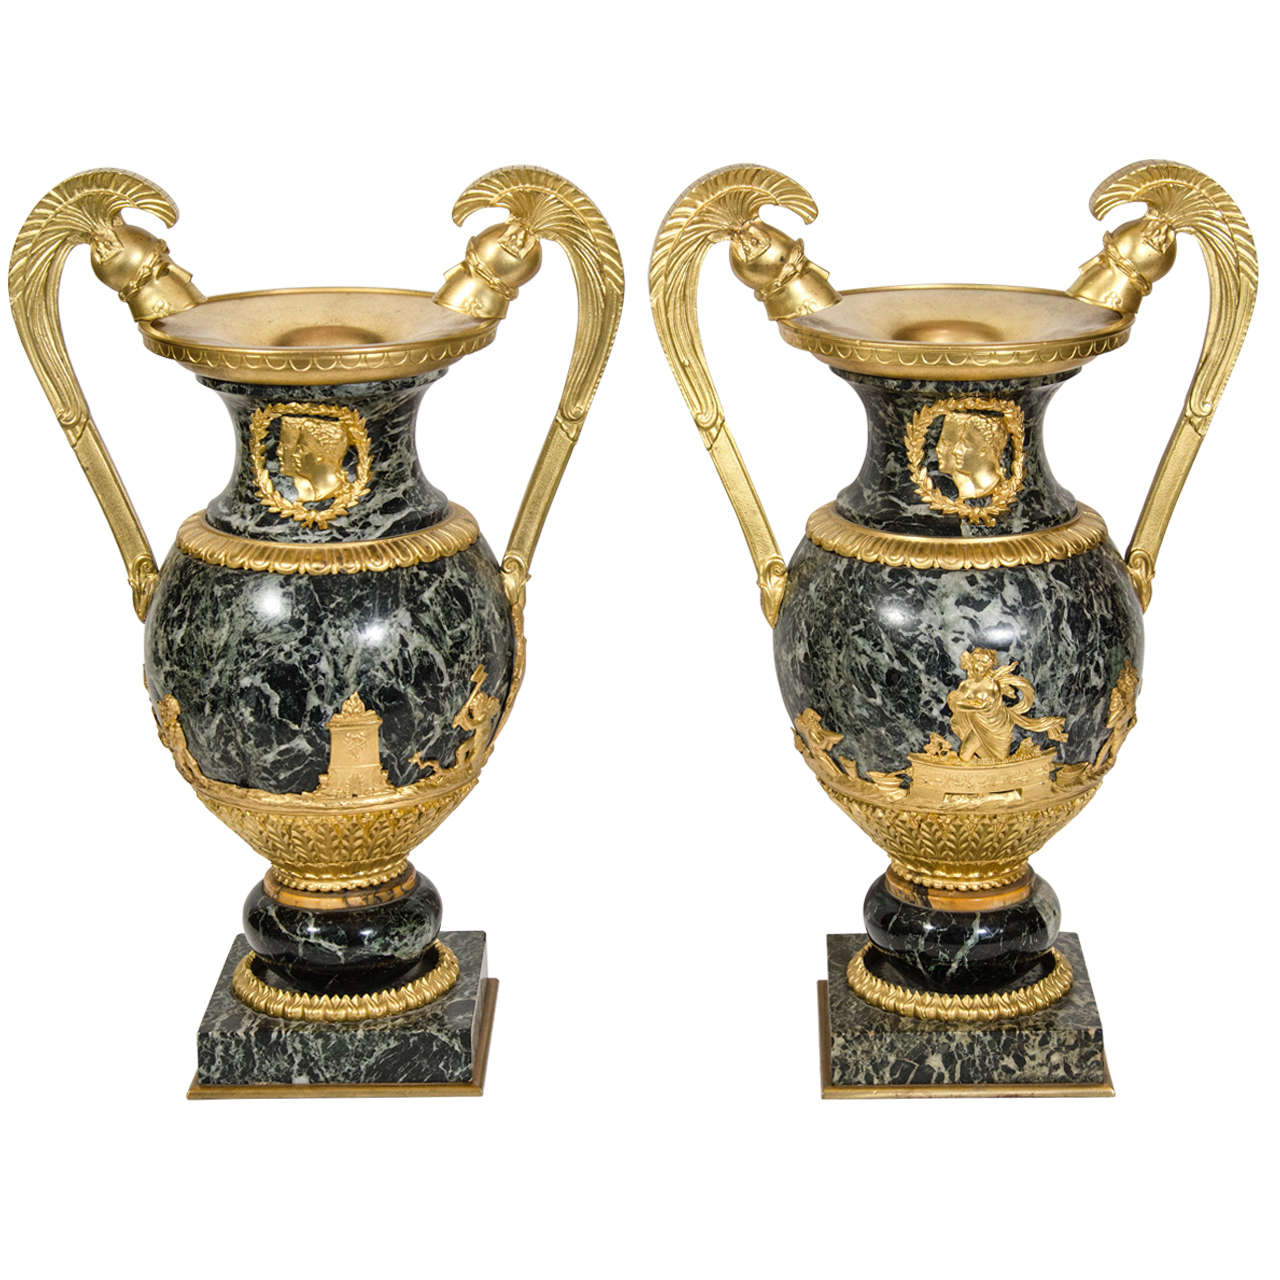 Pair of Antique French Empire Style Gilt Bronze and Green Marble Military Urns For Sale